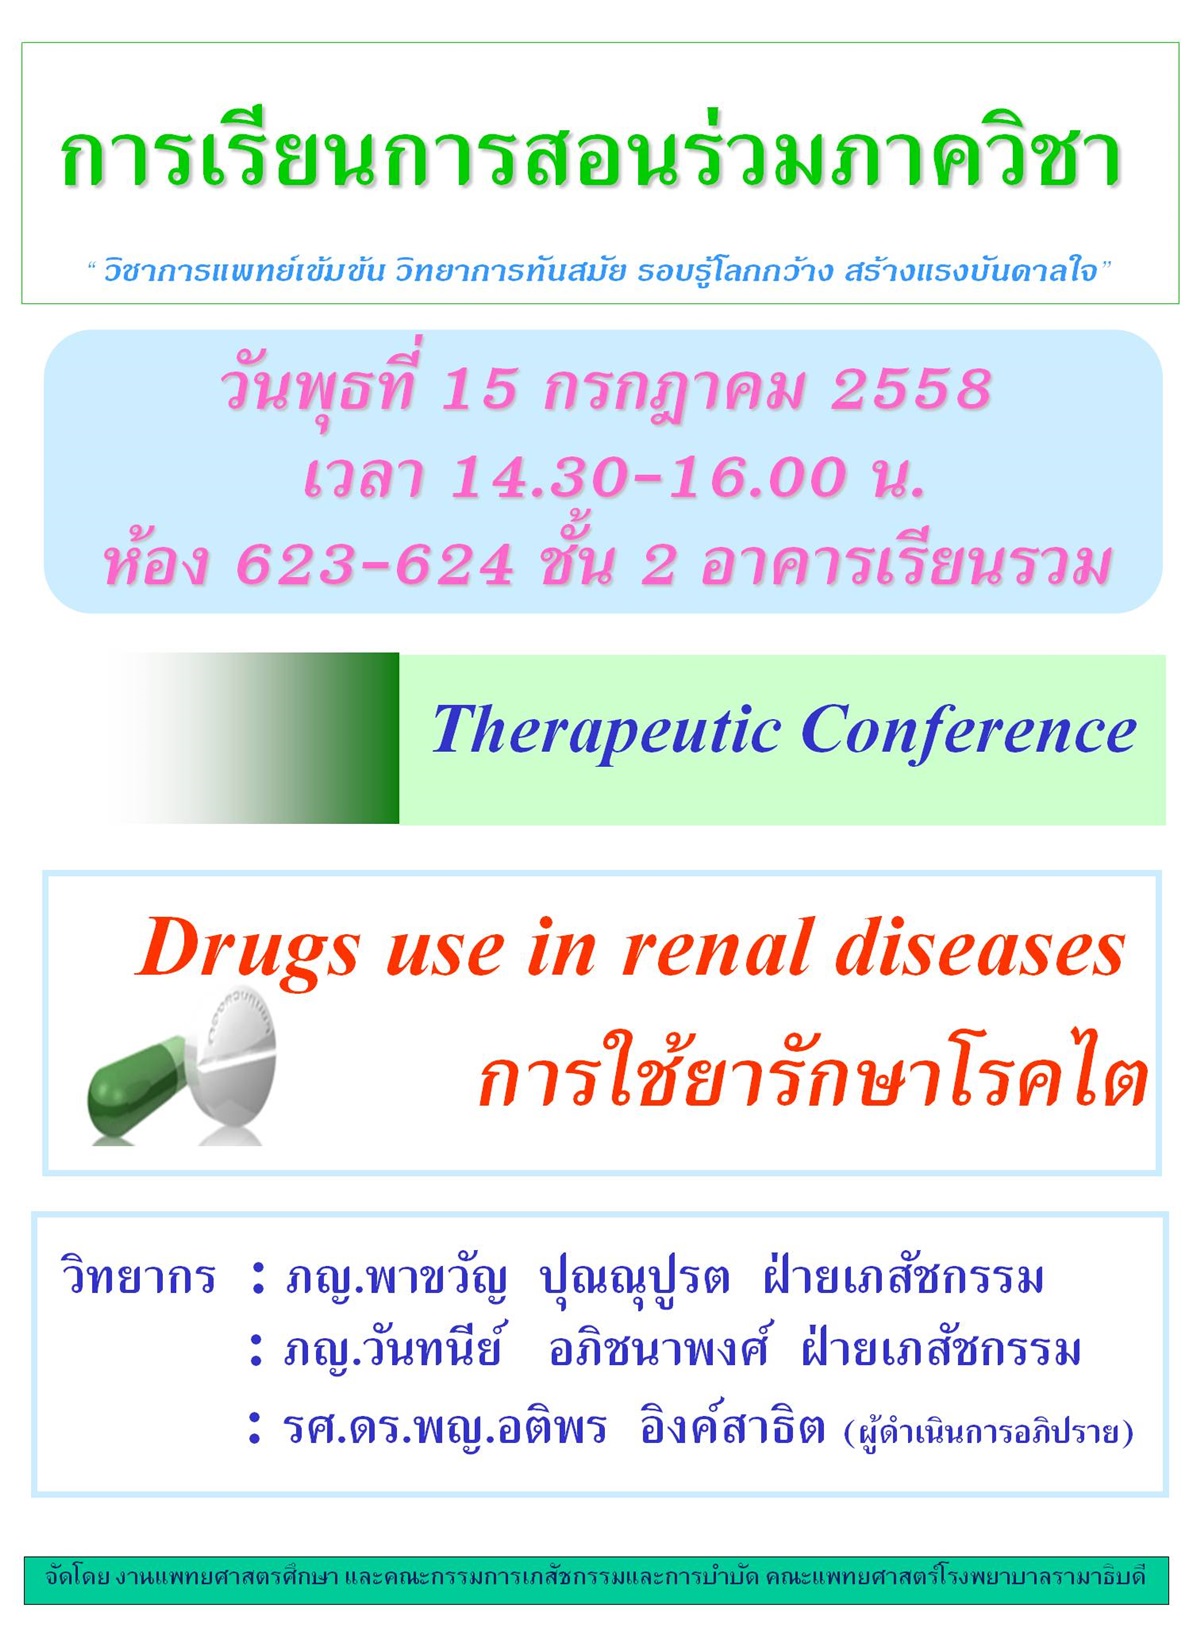 Therapeutic Conference "Drugs use in renal diseases การใช้ยารักษาโรคไต"